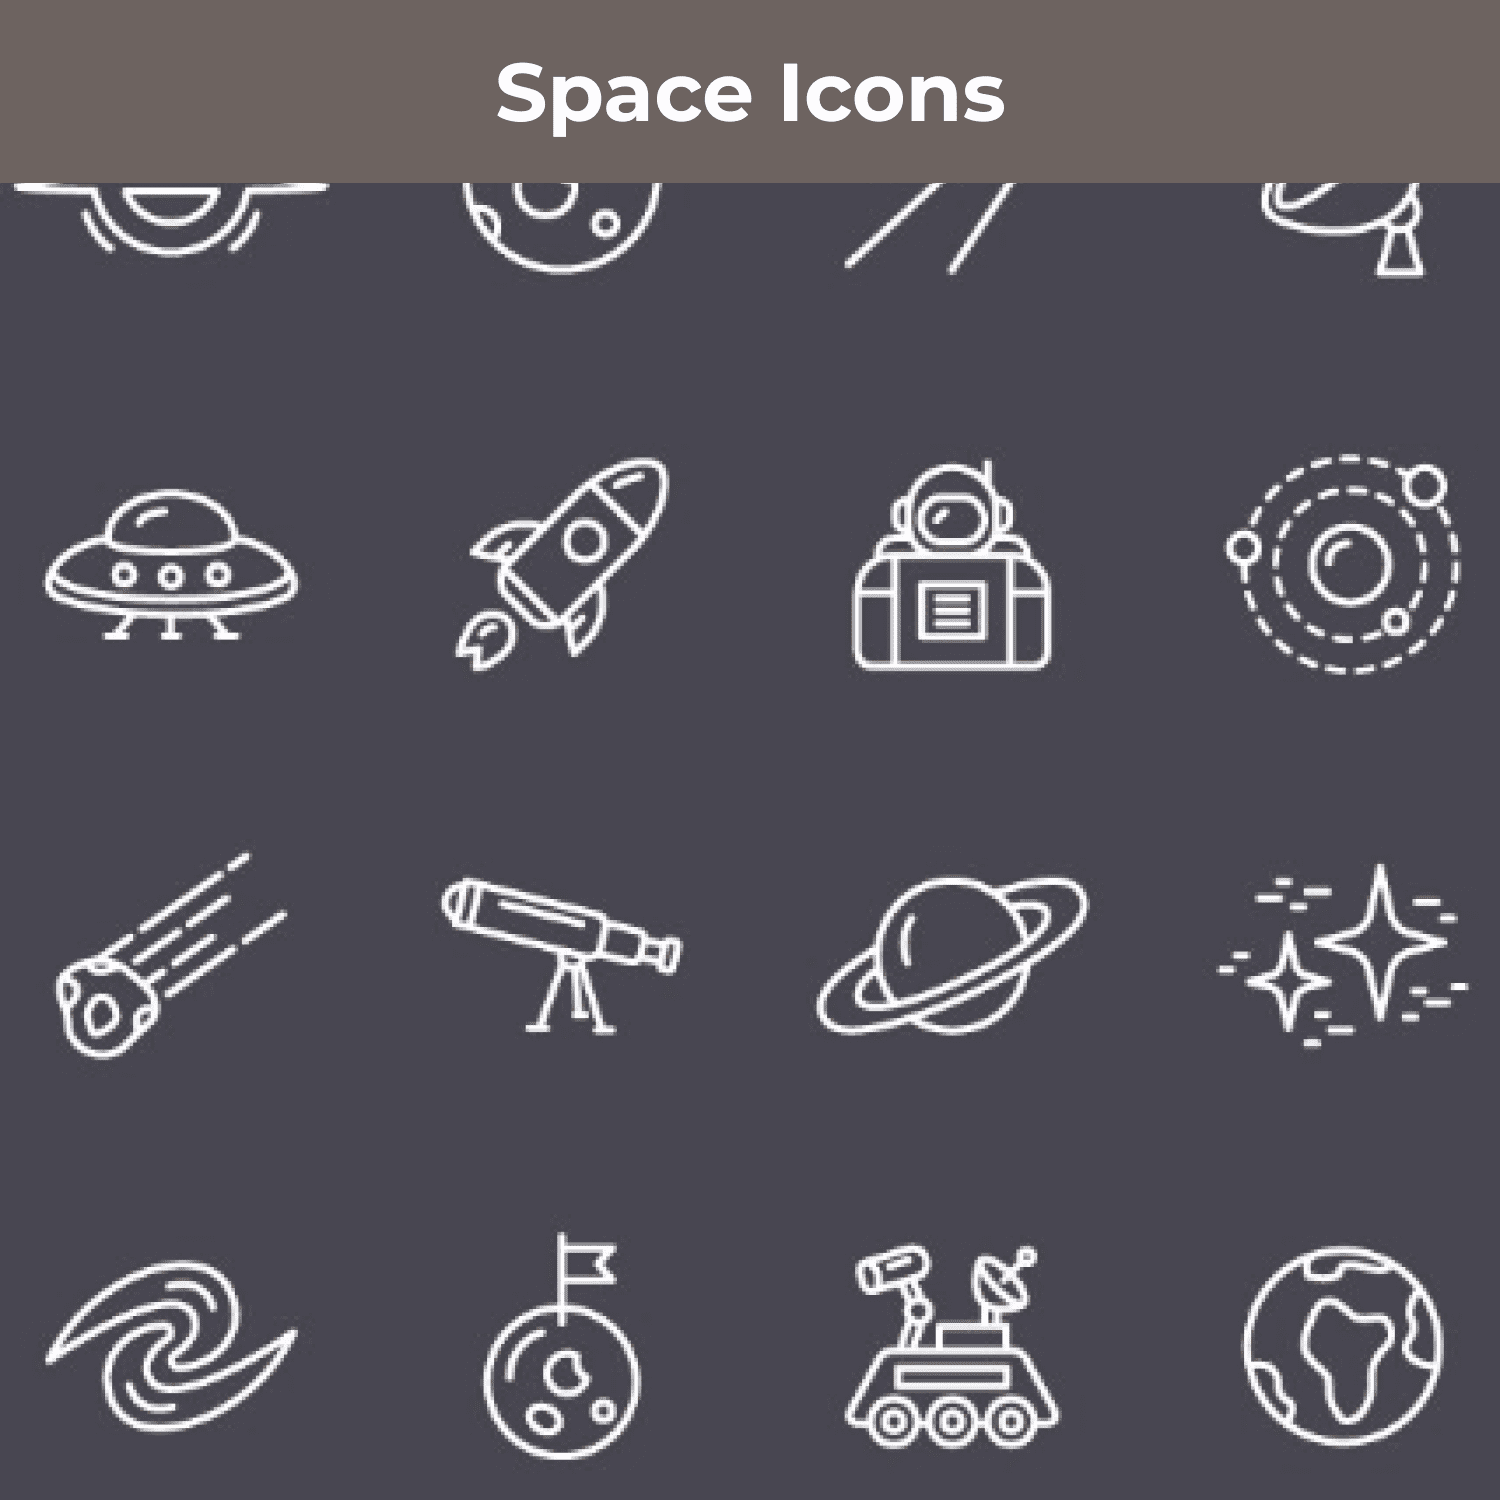 Space Icons main cover.